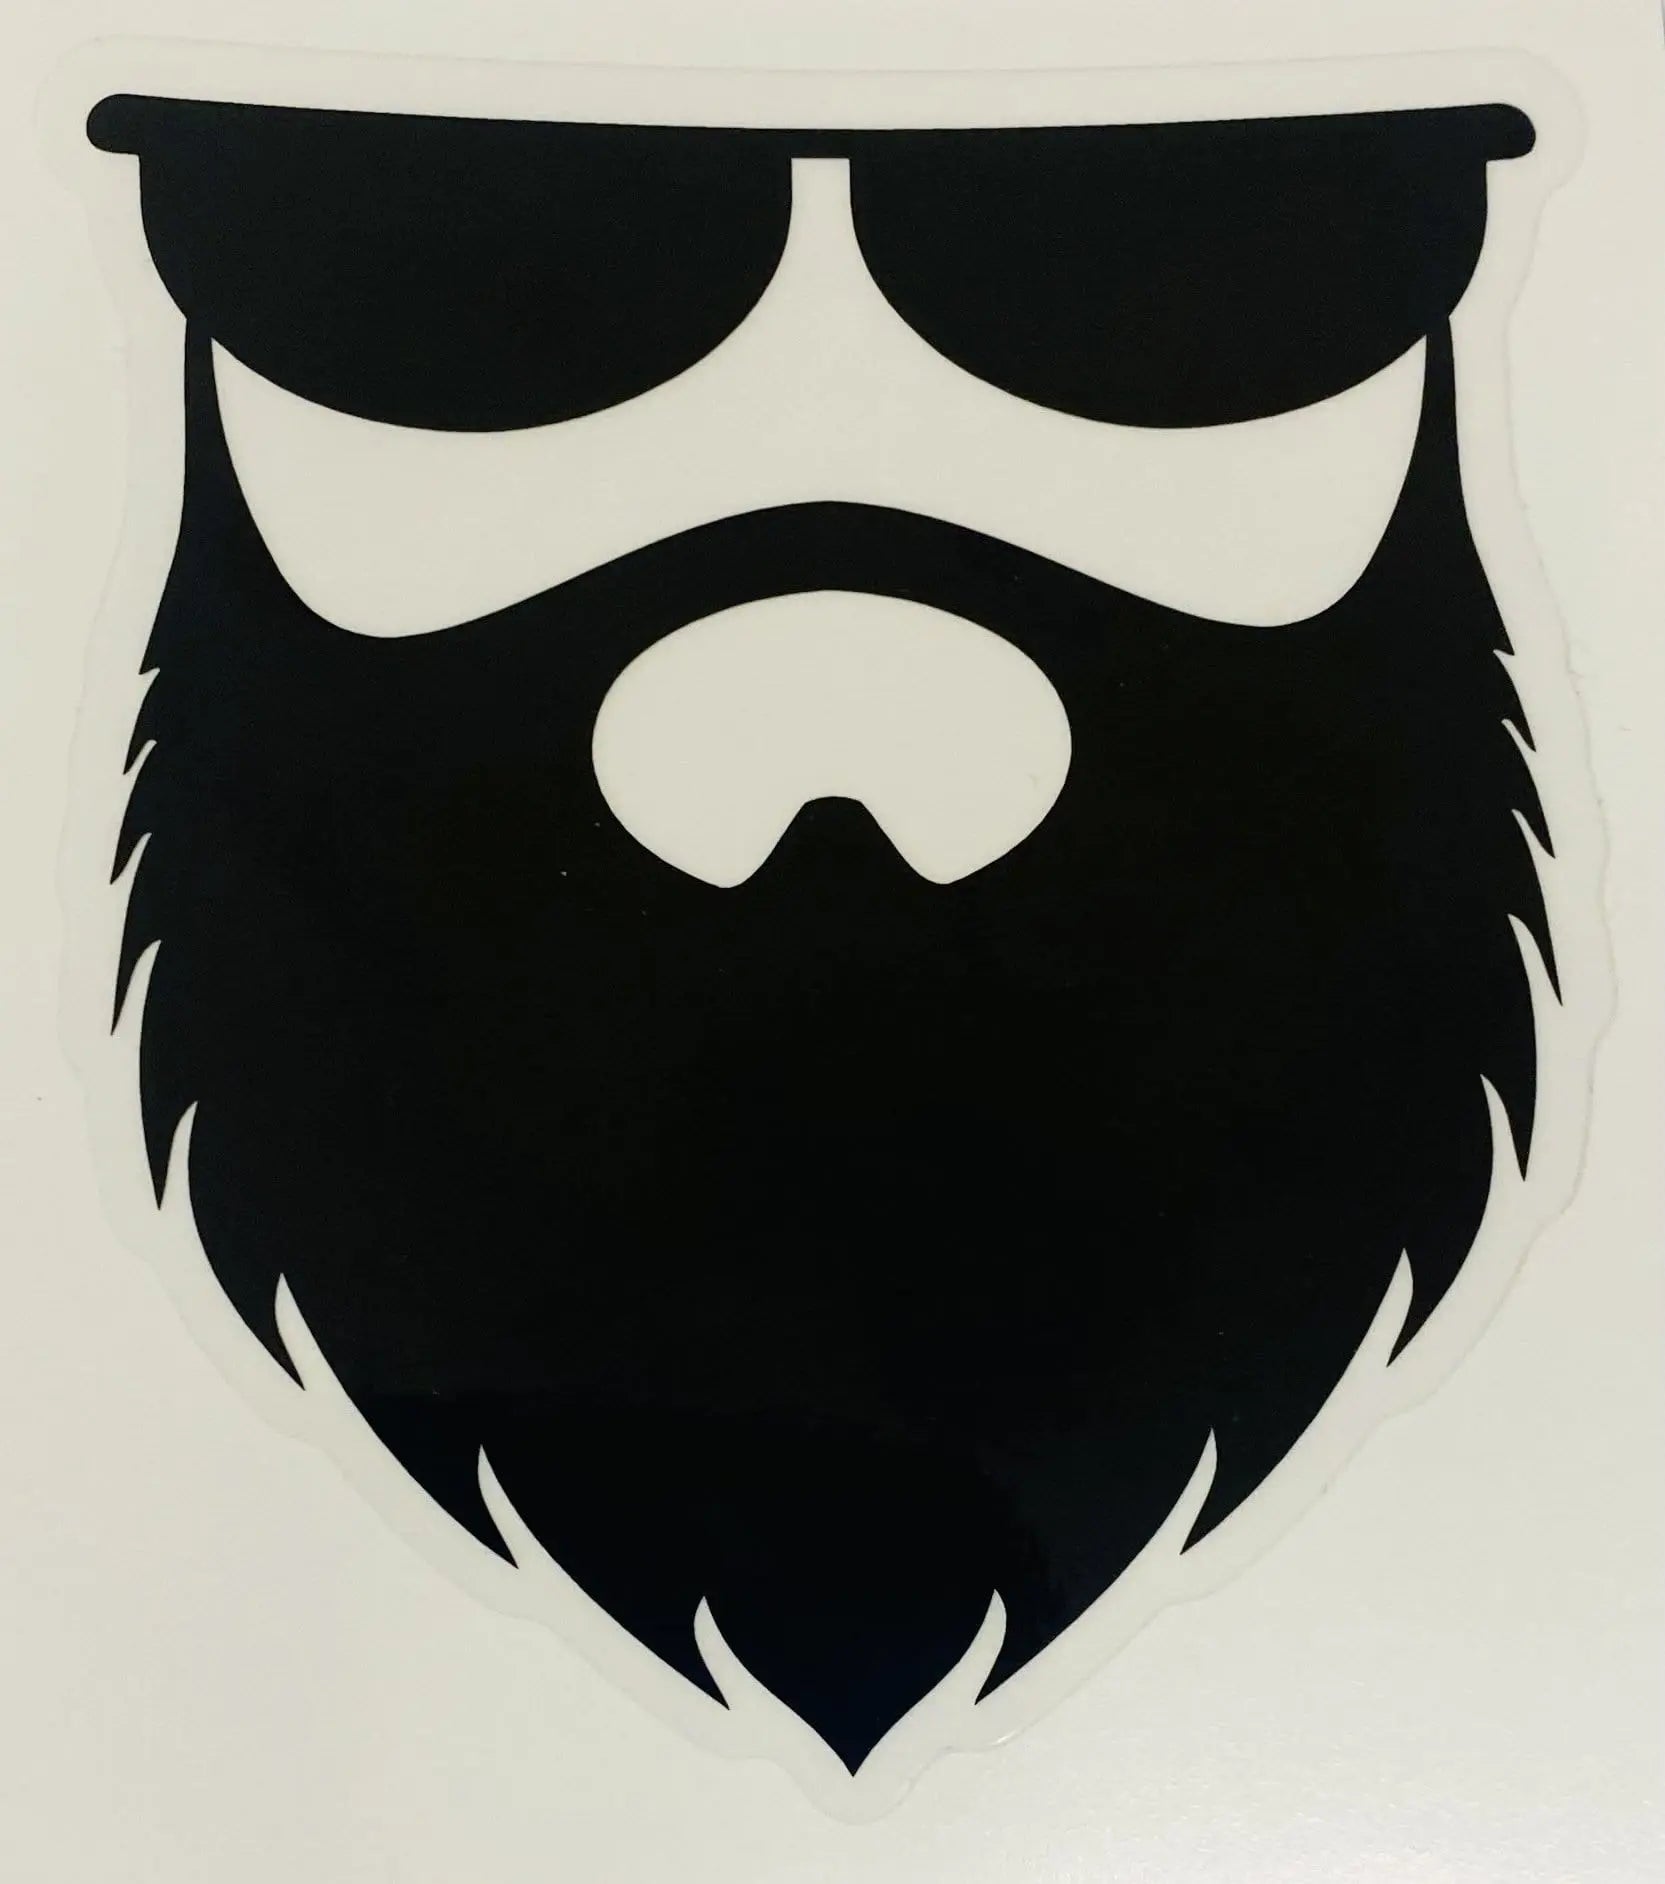 No Shave Life Beard Decal